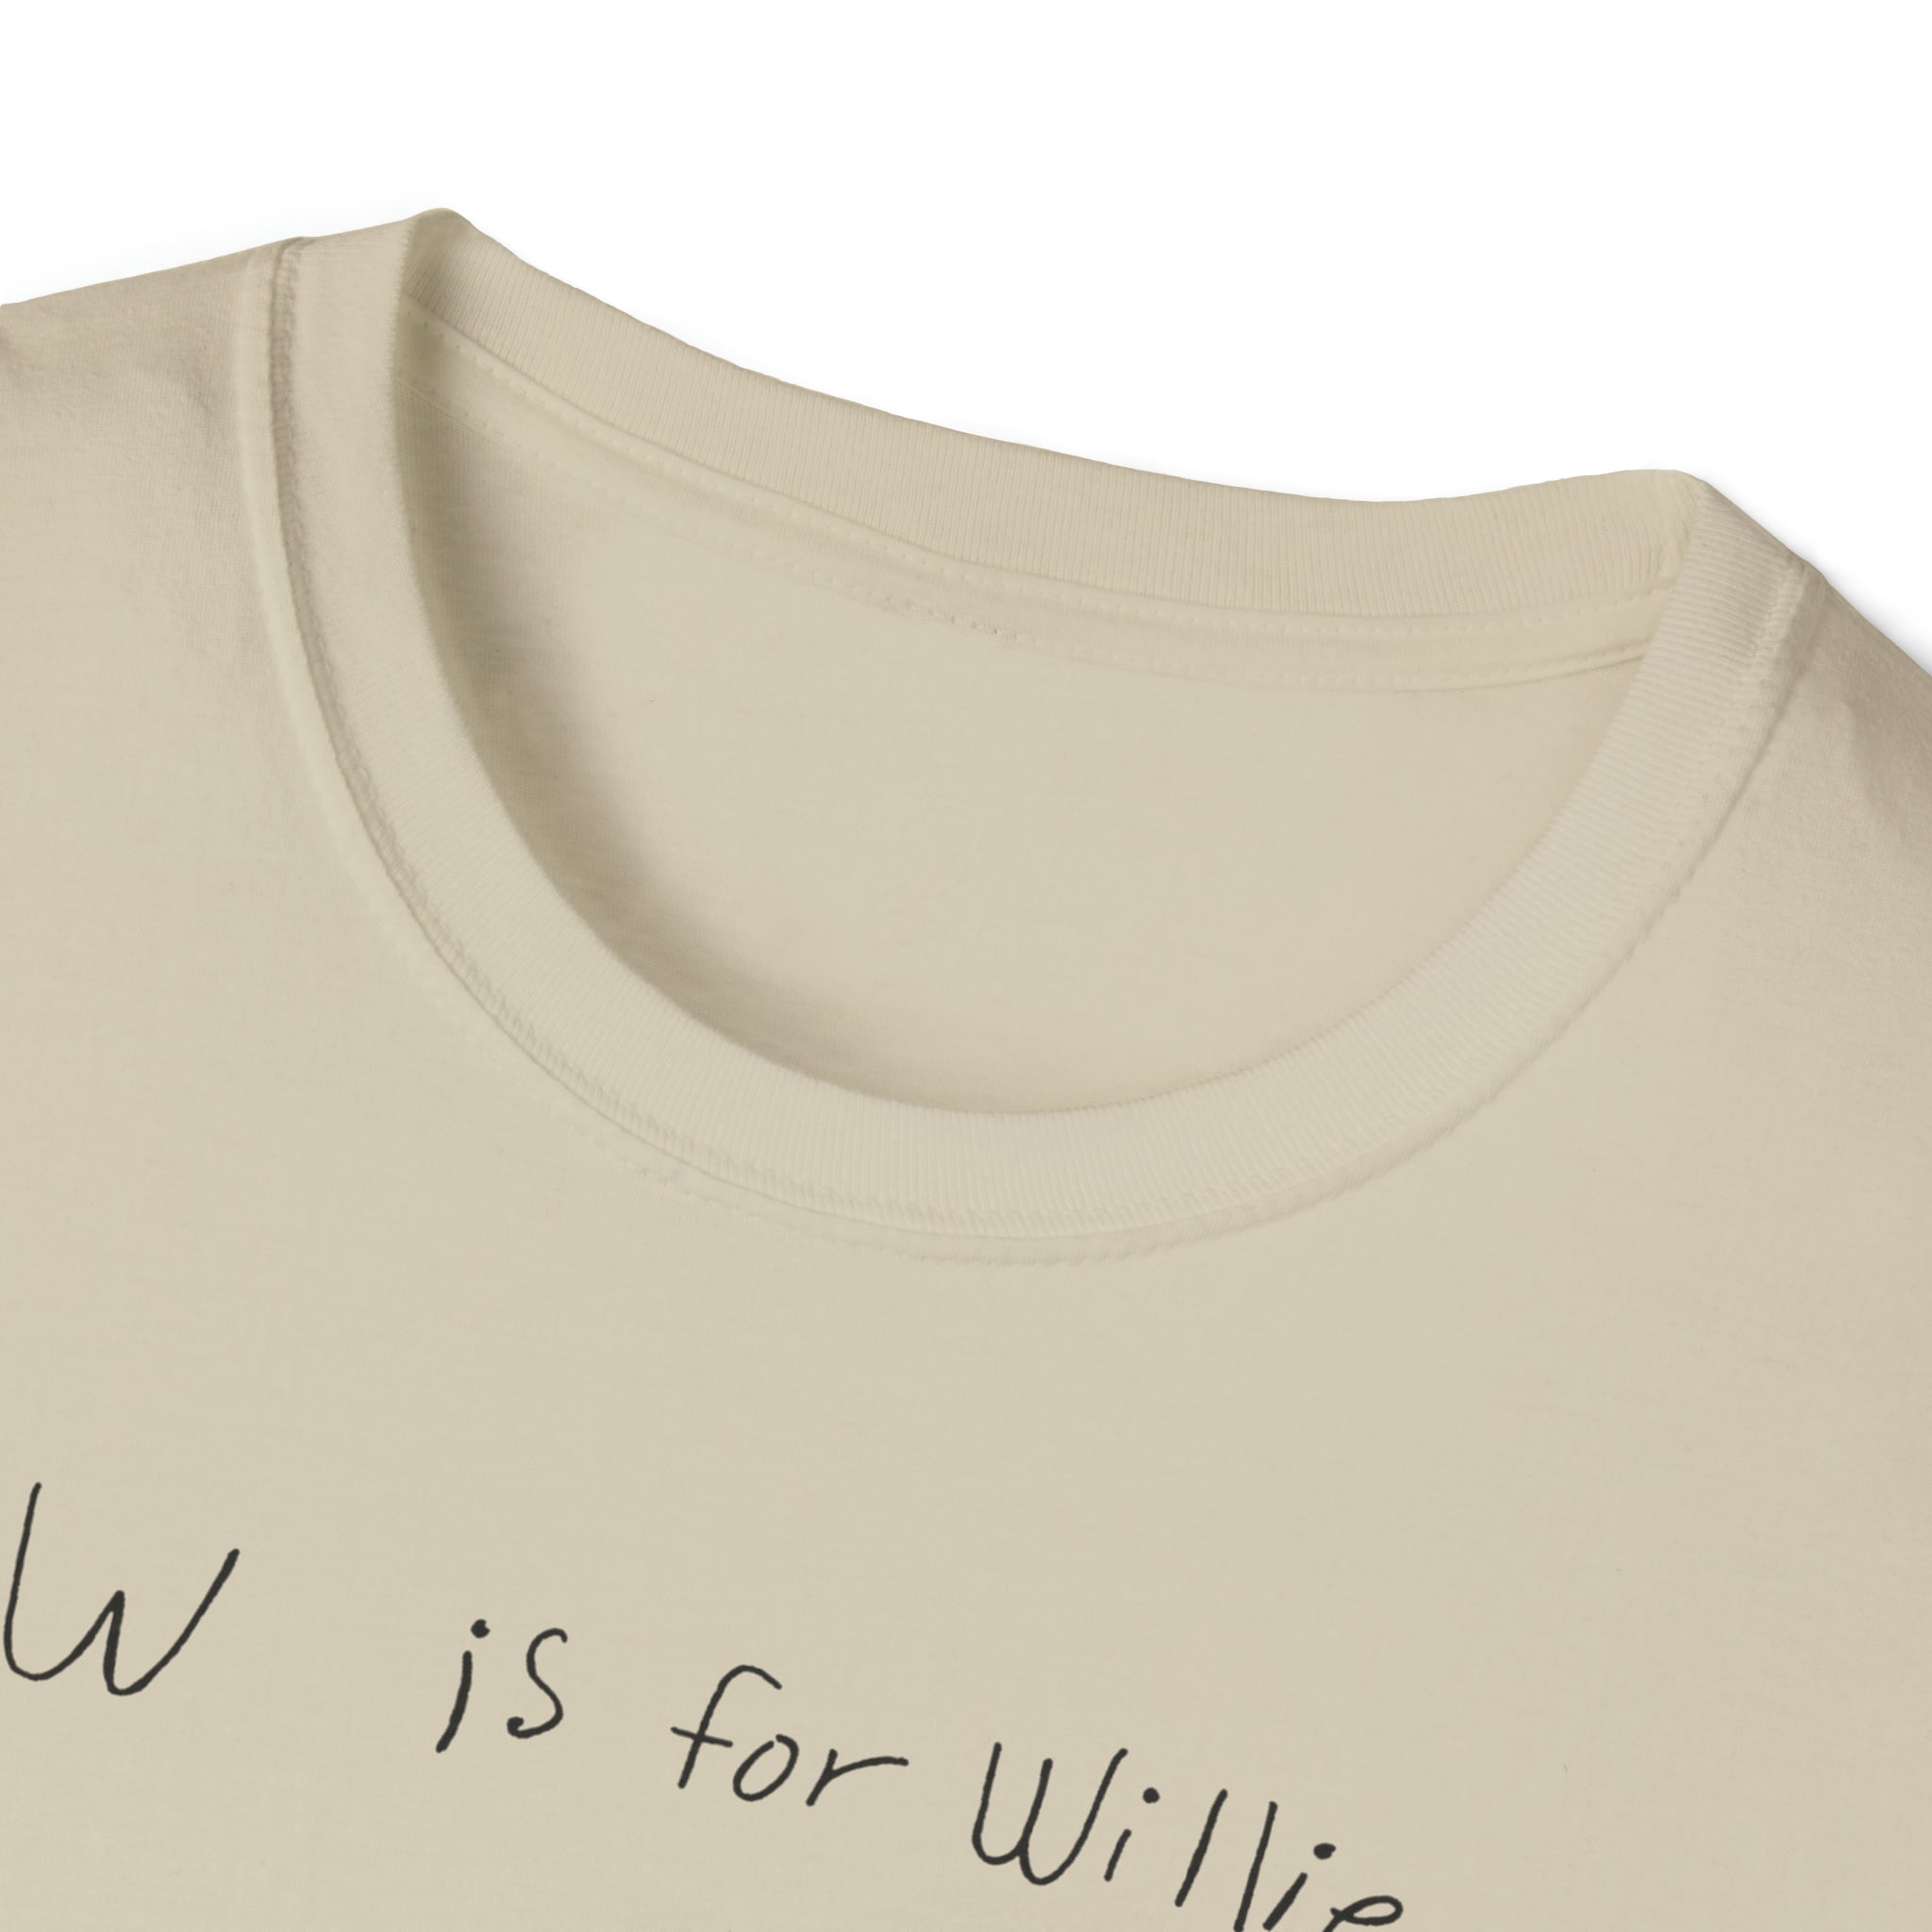 W is for Willie Unisex Softstyle T-Shirt